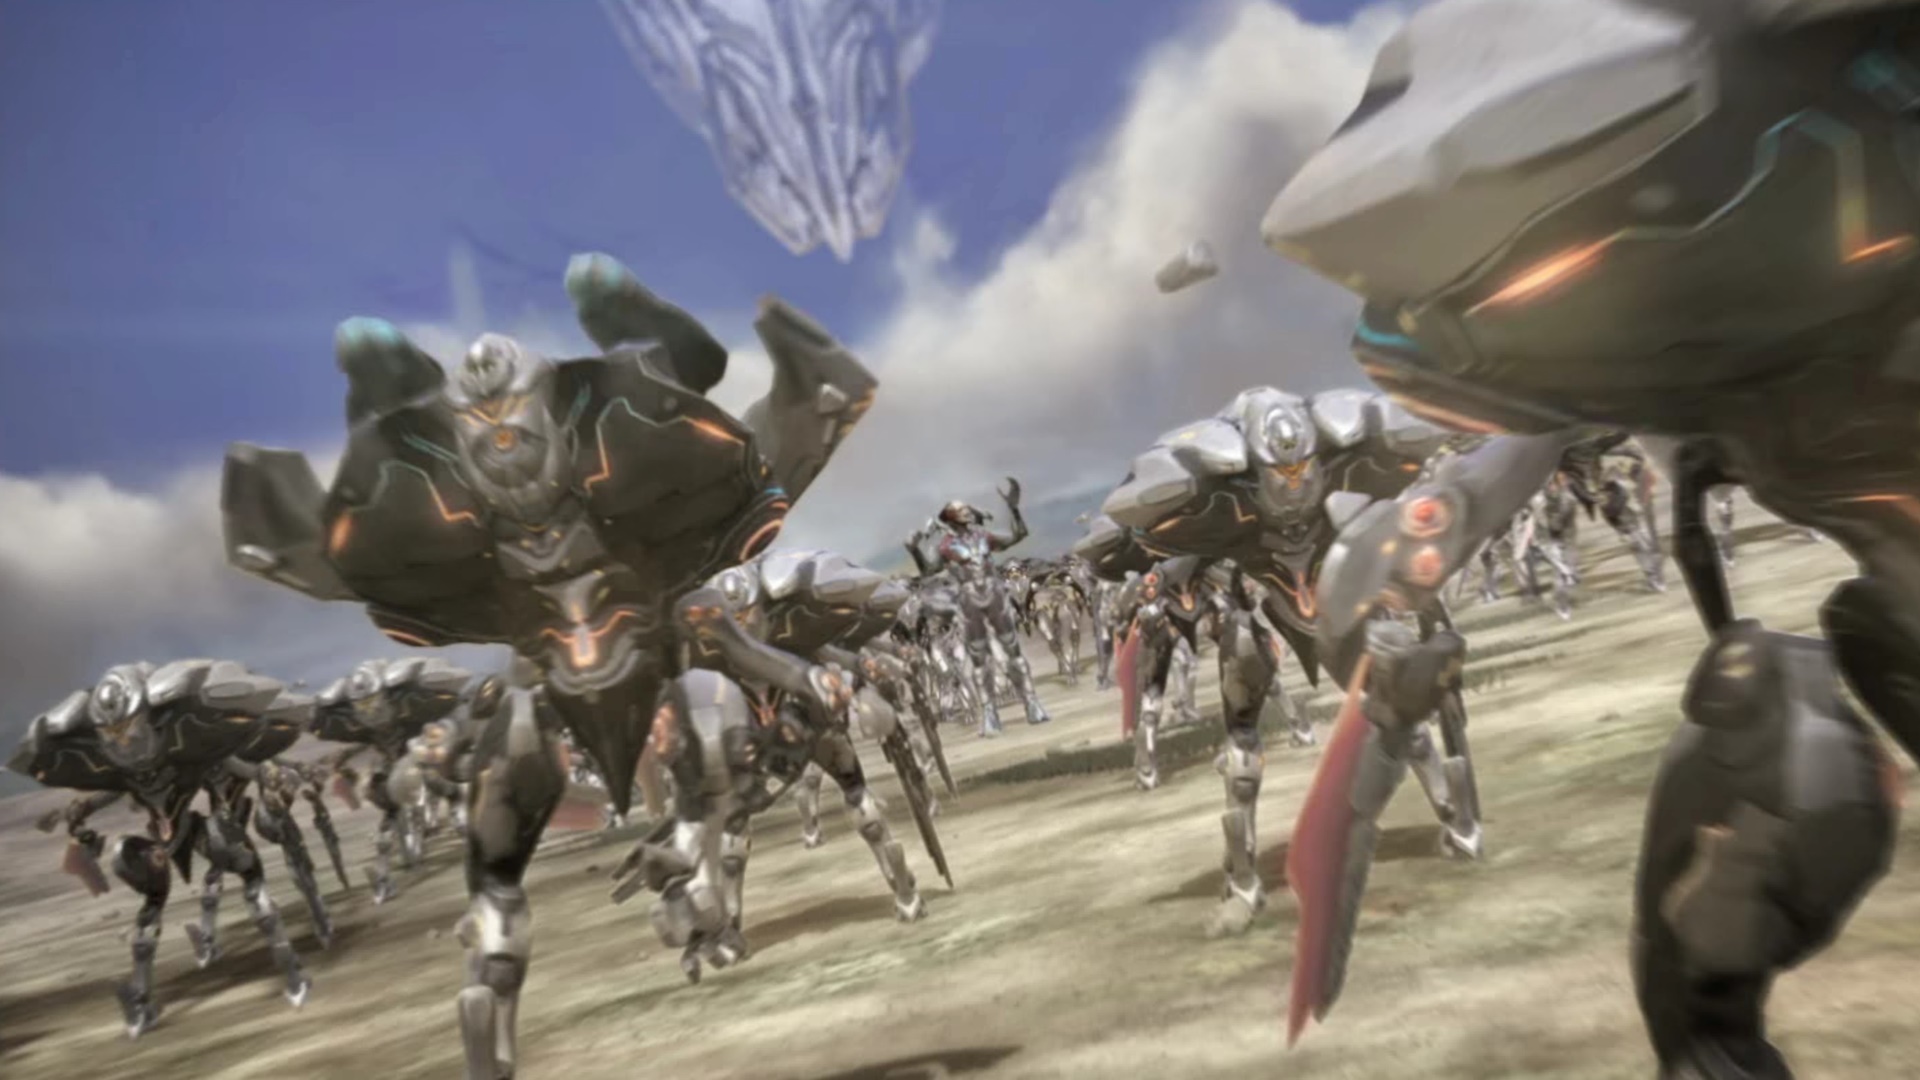 Halo 4 Terminal screenshot of the Didact surrounded by his army of Promethean Knights